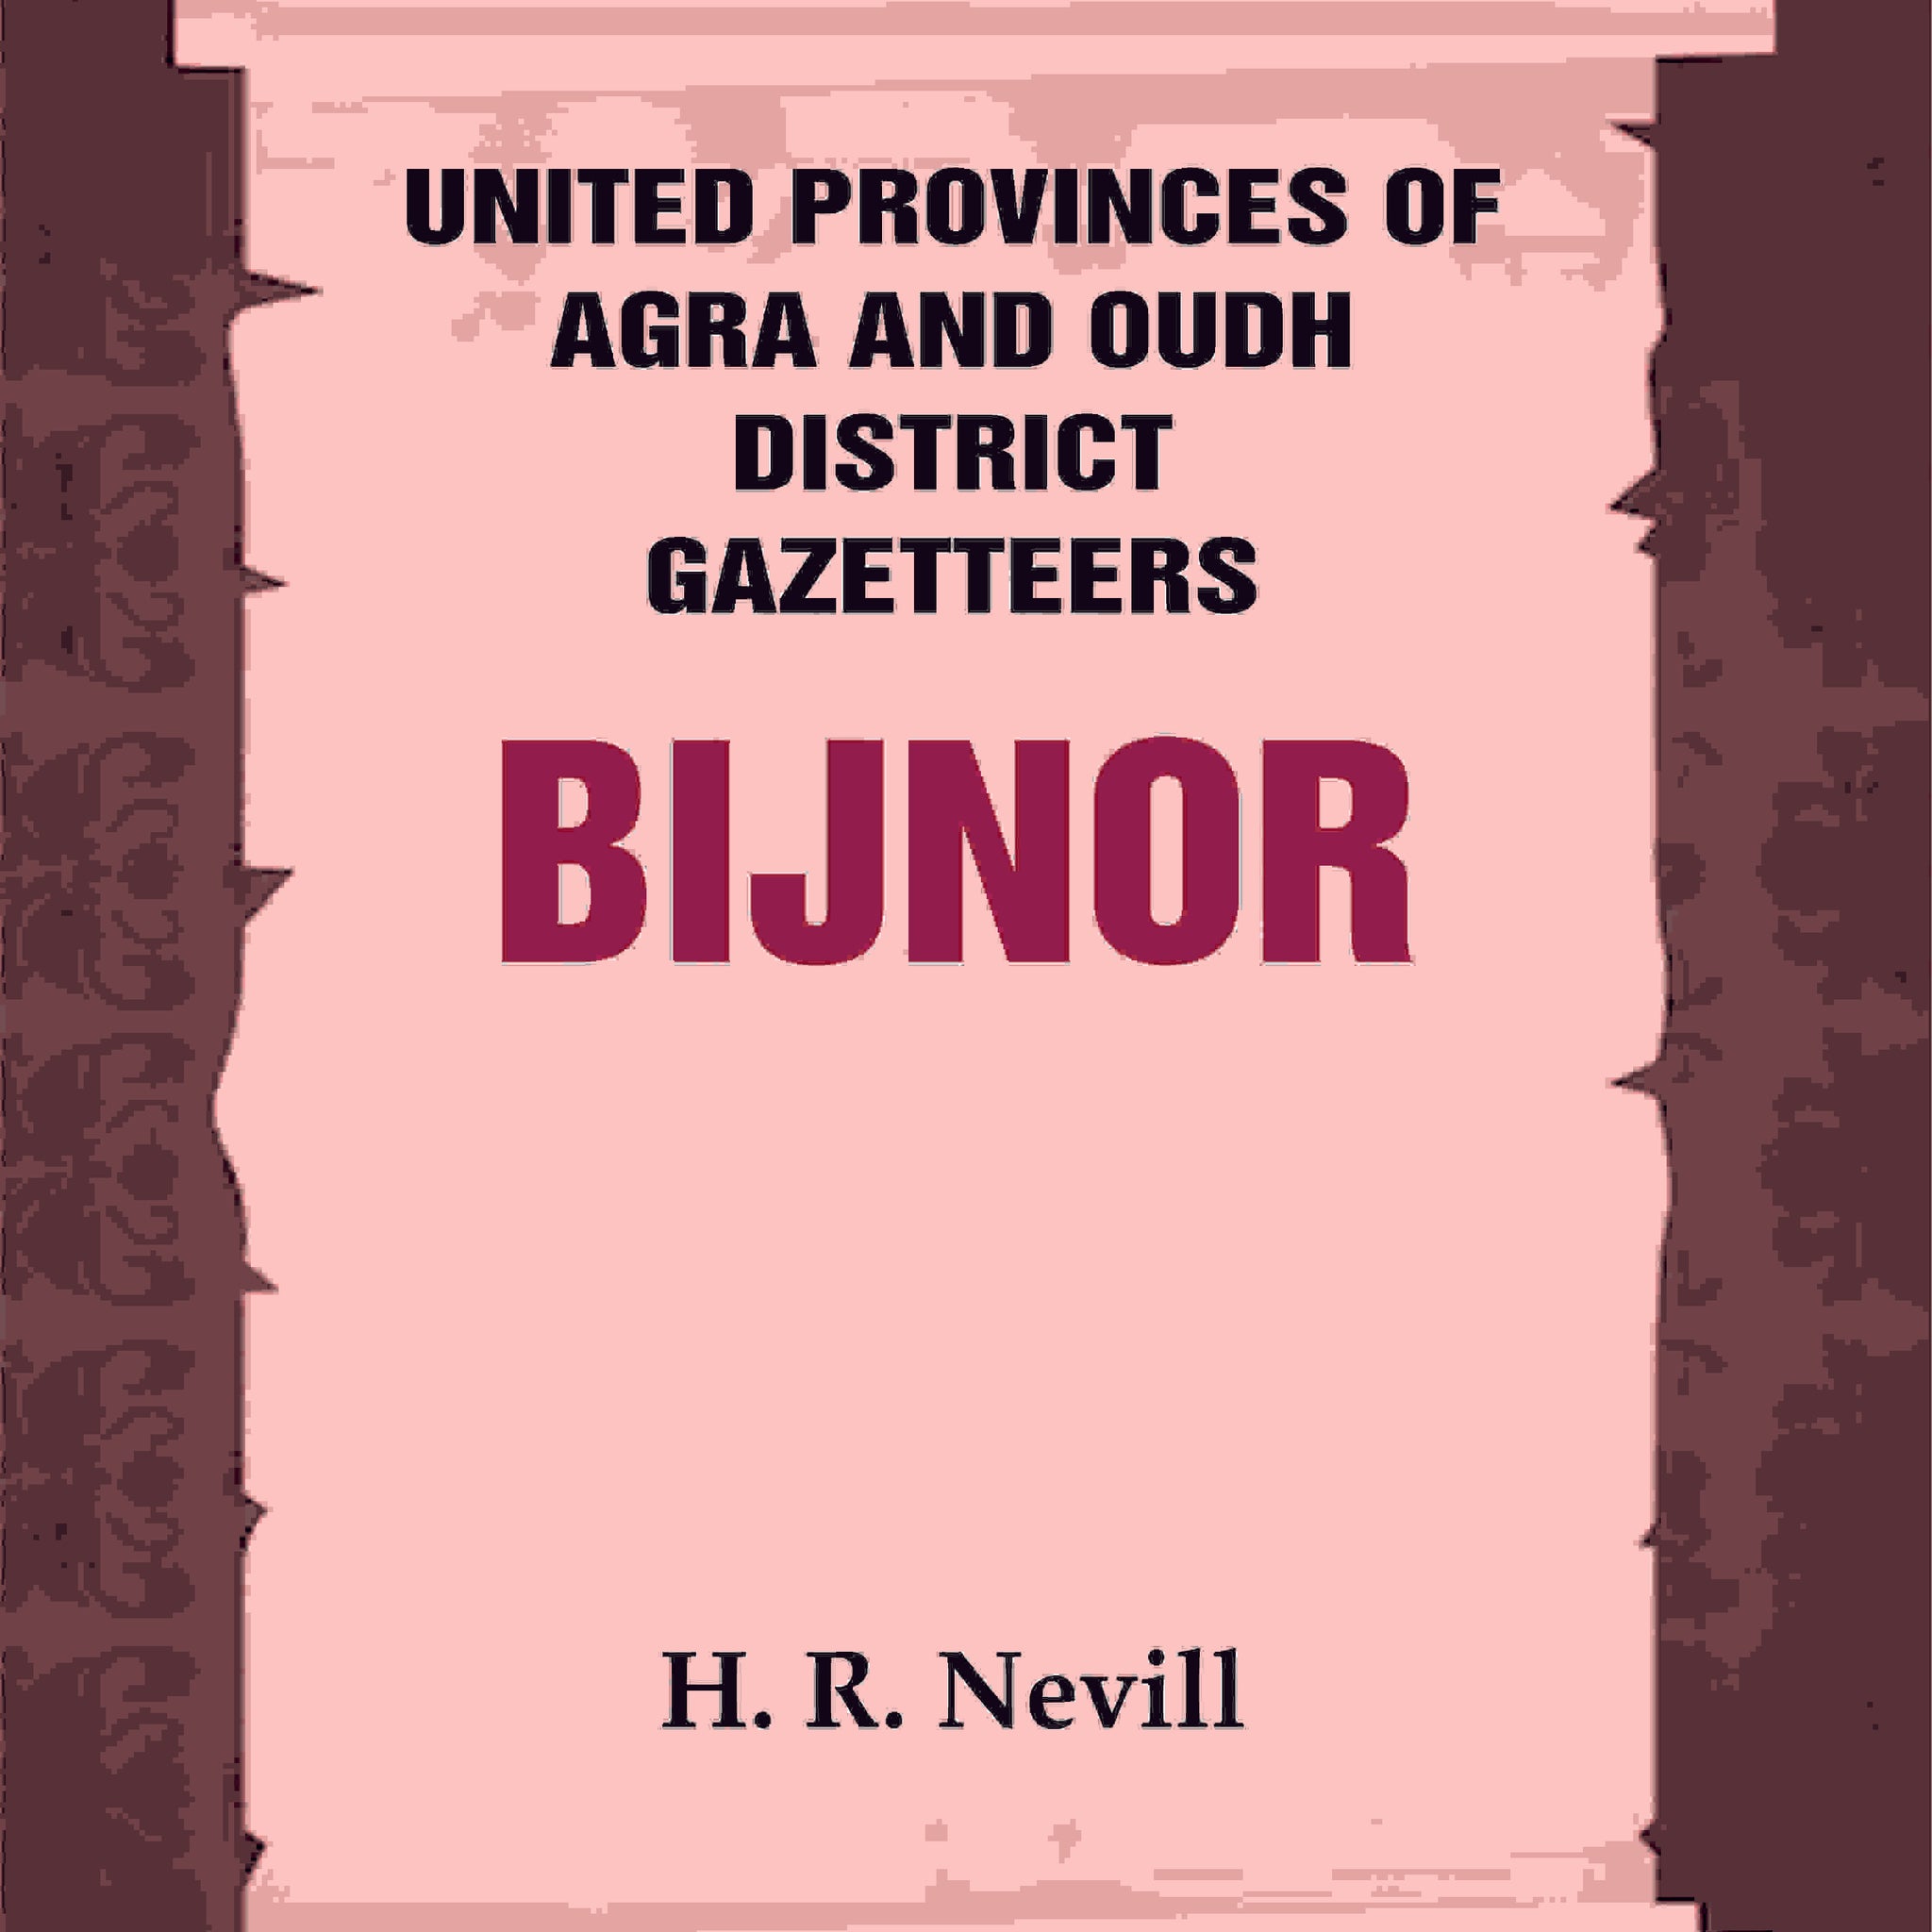 United Provinces of Agra and Oudh District Gazetteers: Bijnor